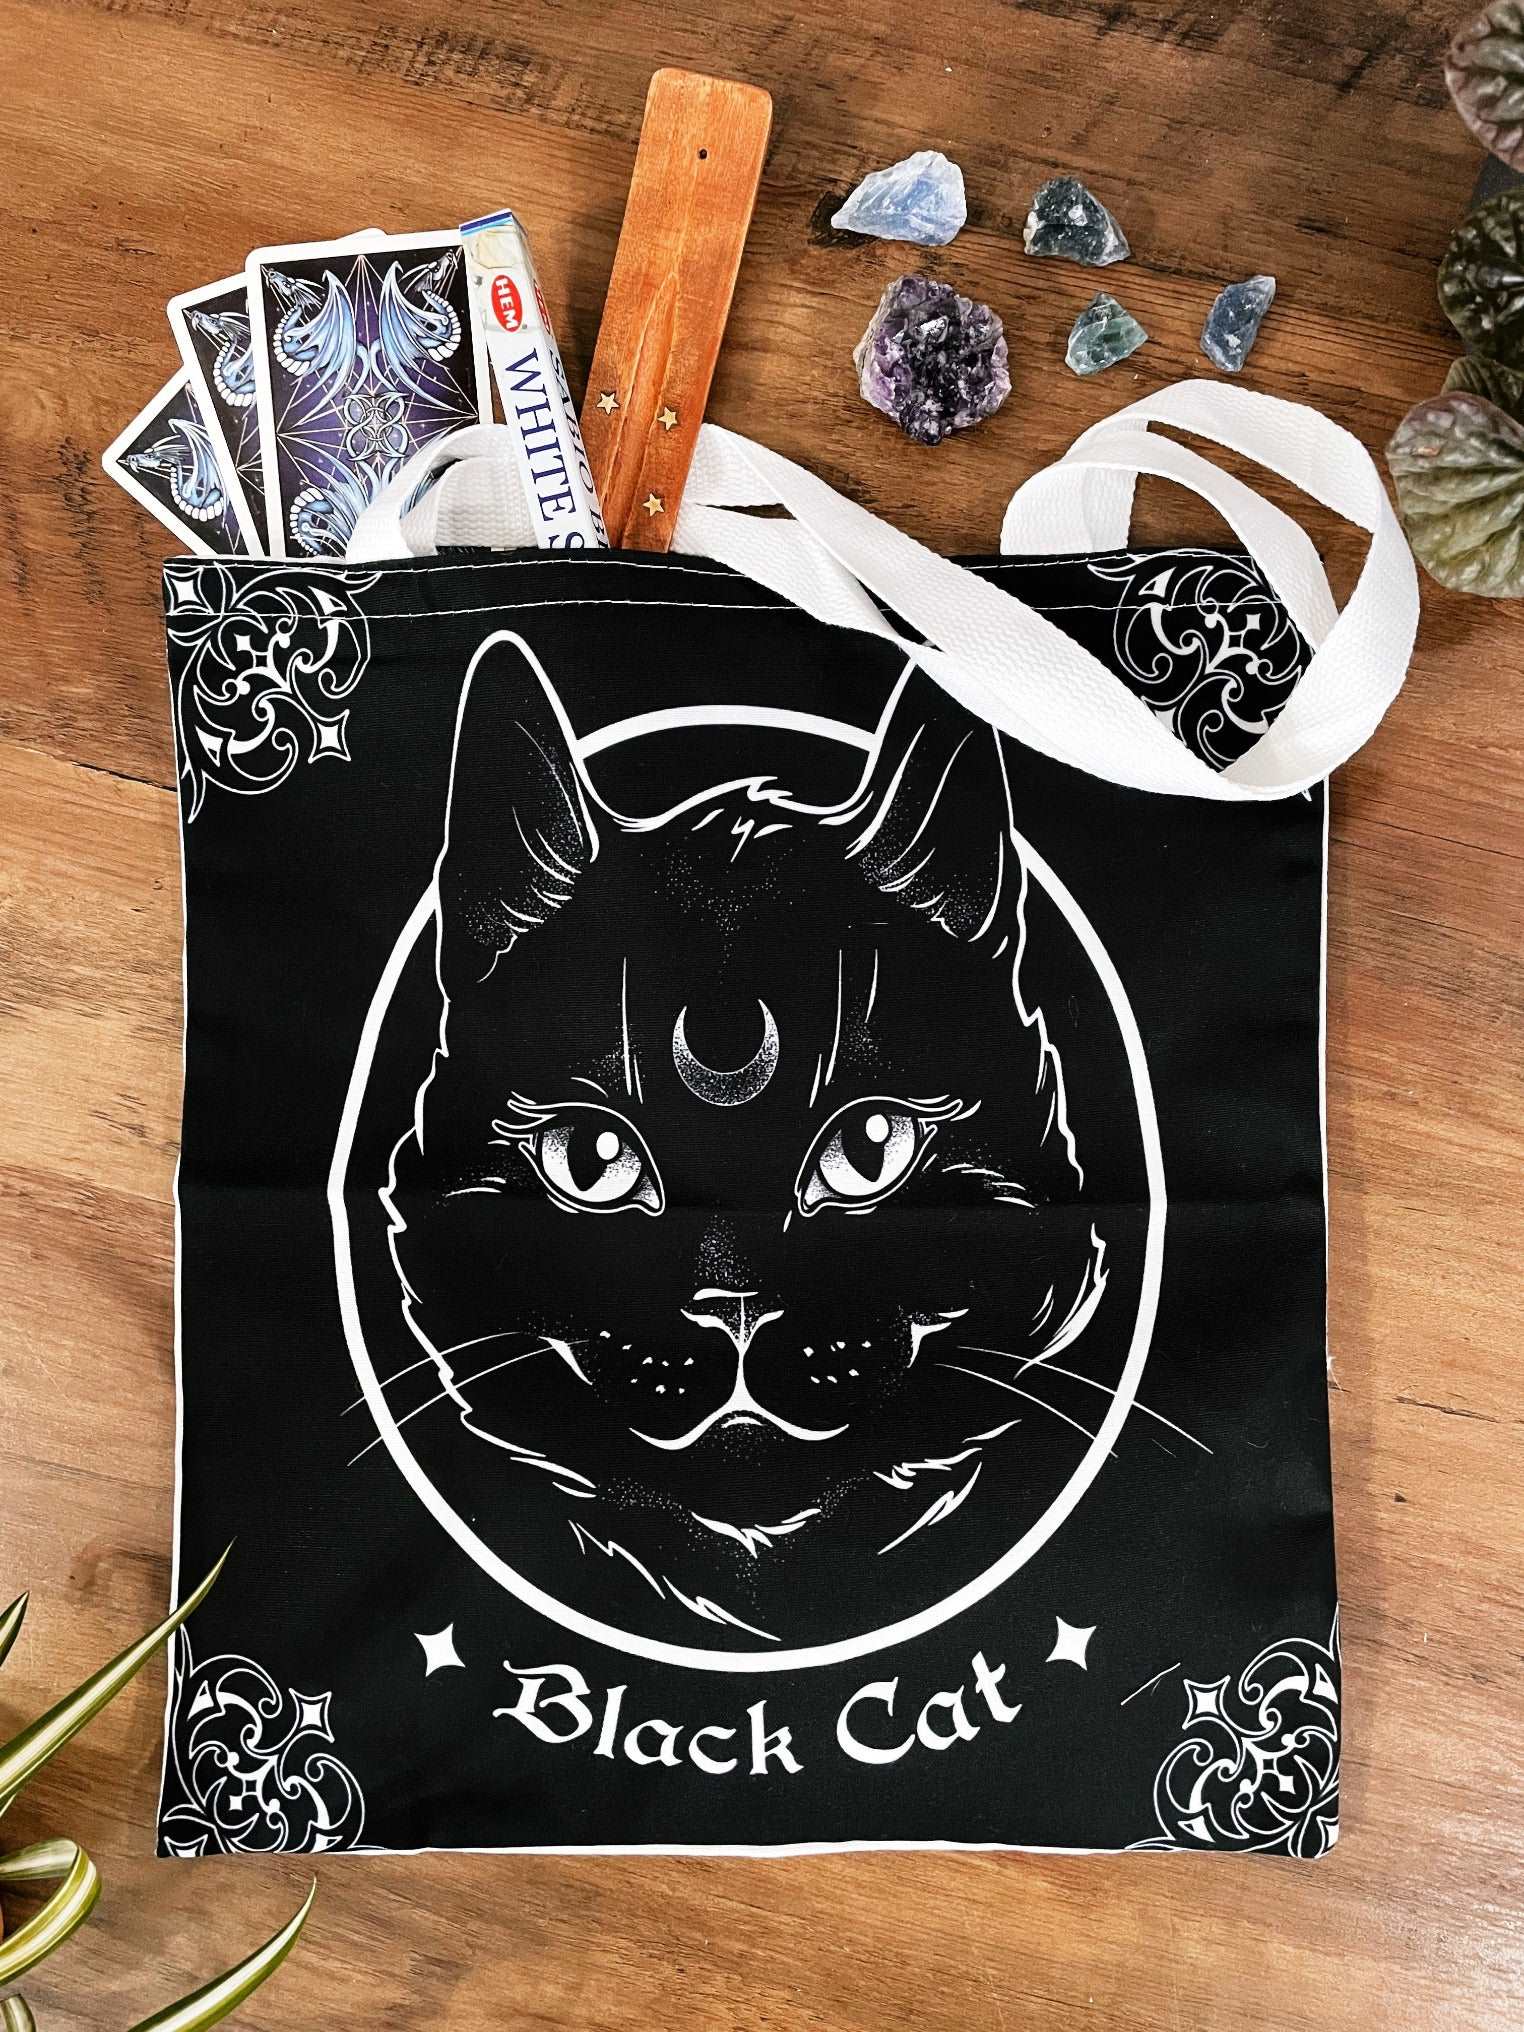 Pictured is a large canvas tote bag featuring an image of a black cat.